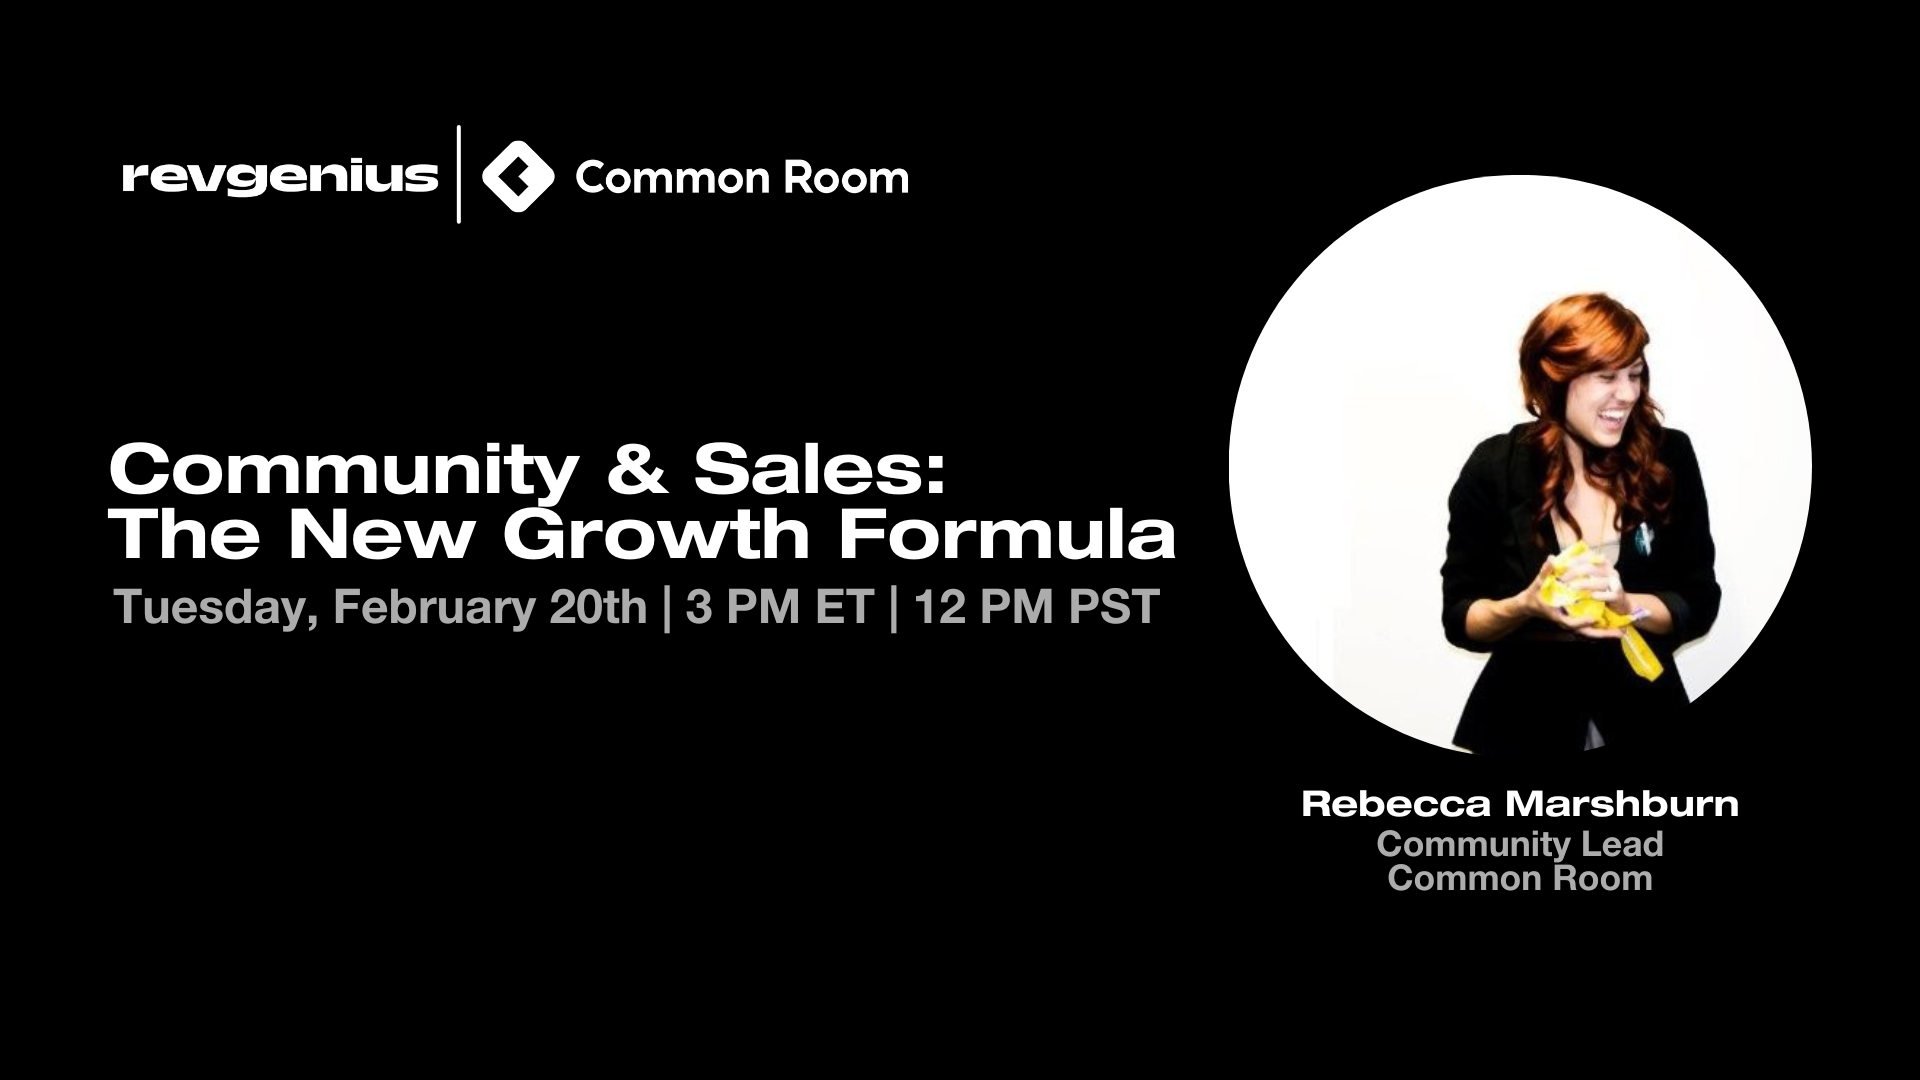 Community & Sales The New Growth Formula